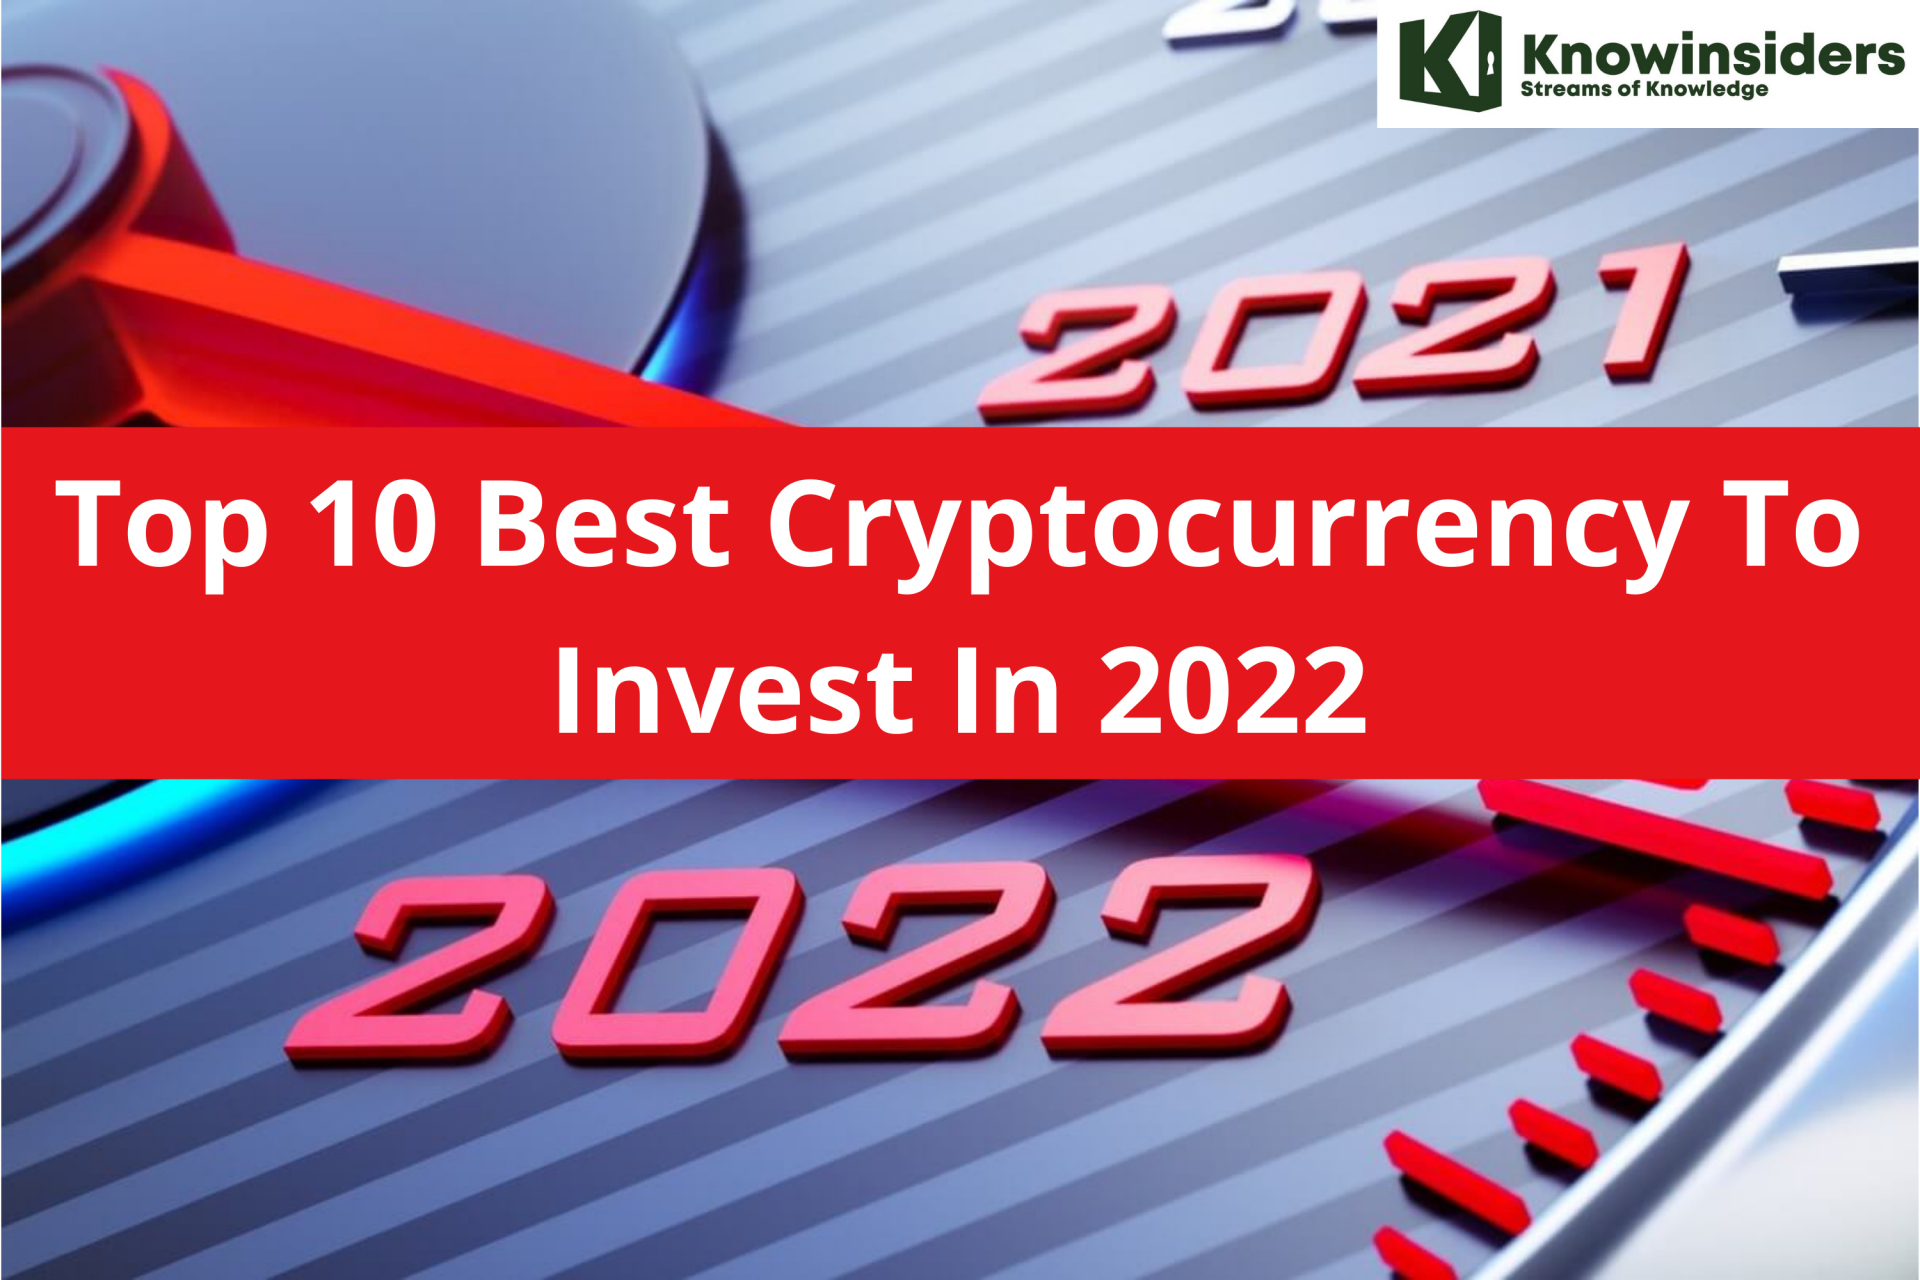 Top 10 Best Cryptocurrency To Invest In 2022